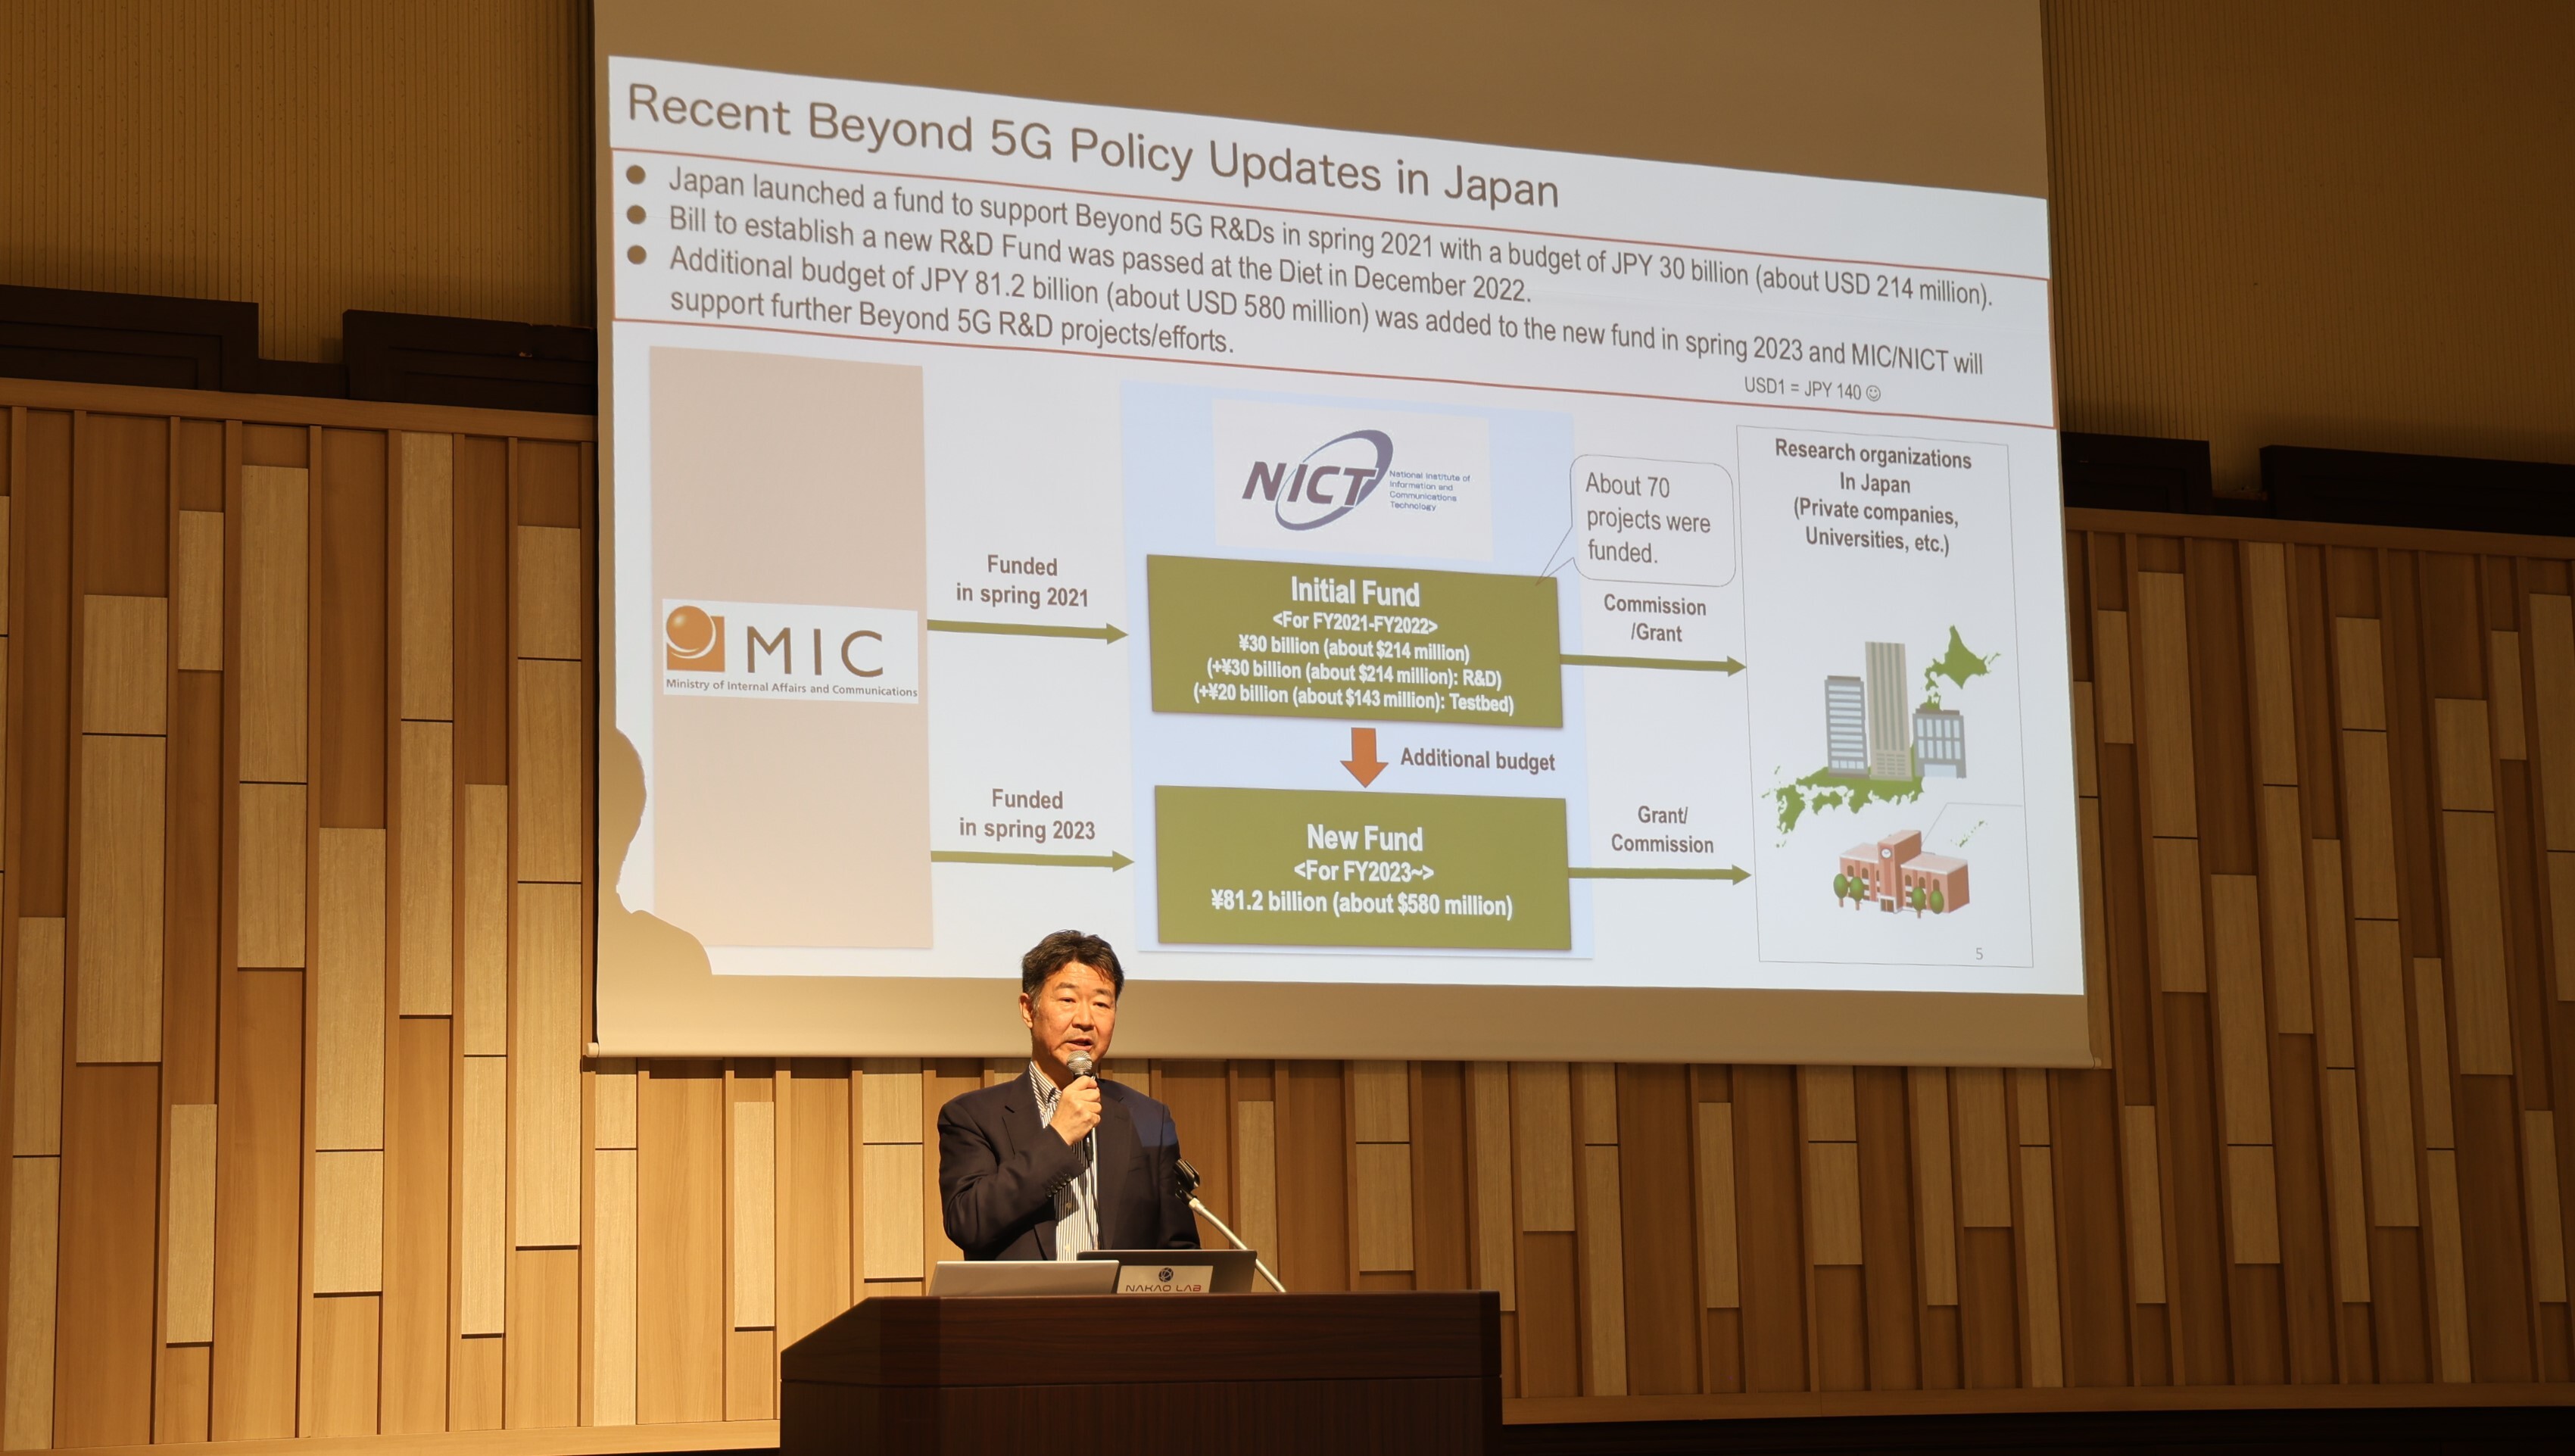  Professor Nakao Akihiro from the University of Tokyo shared insights into the forward-looking technologies of 5G/6G and their key applications.